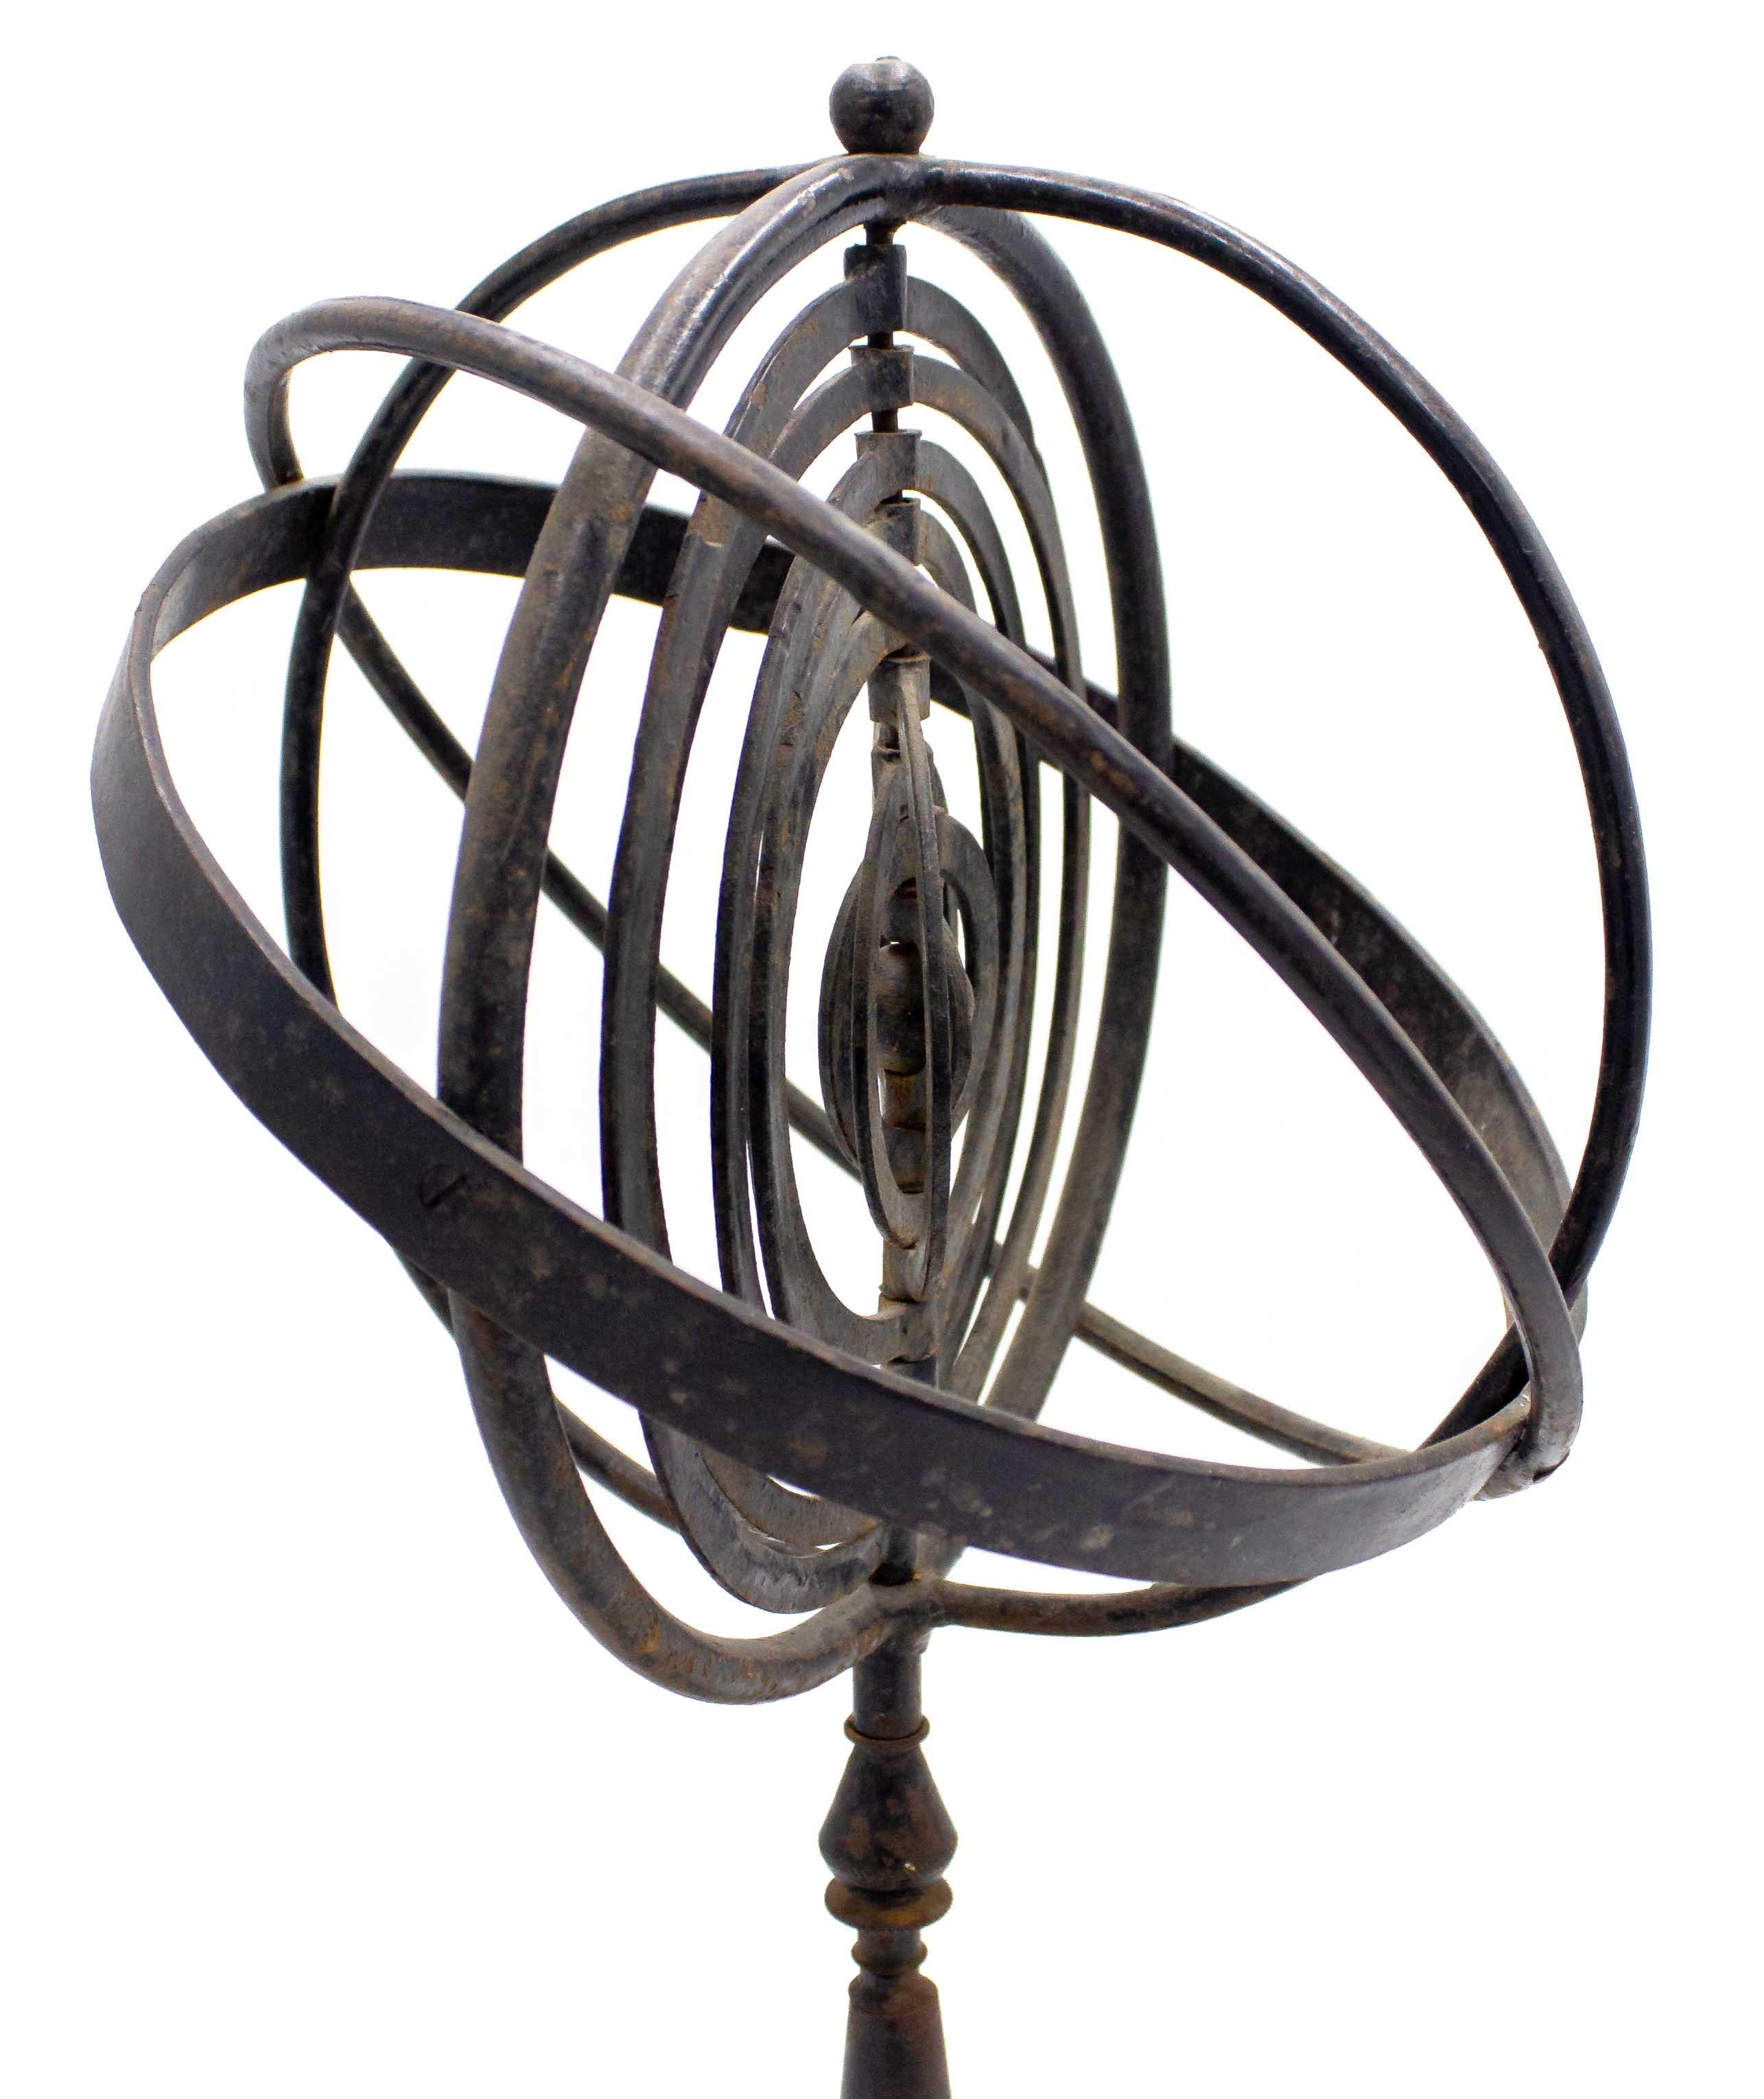 Italian Mid-Century Modern wrought iron armillary globe with a center sun surrounded by 9 movable planetary rings on a platform base.
 